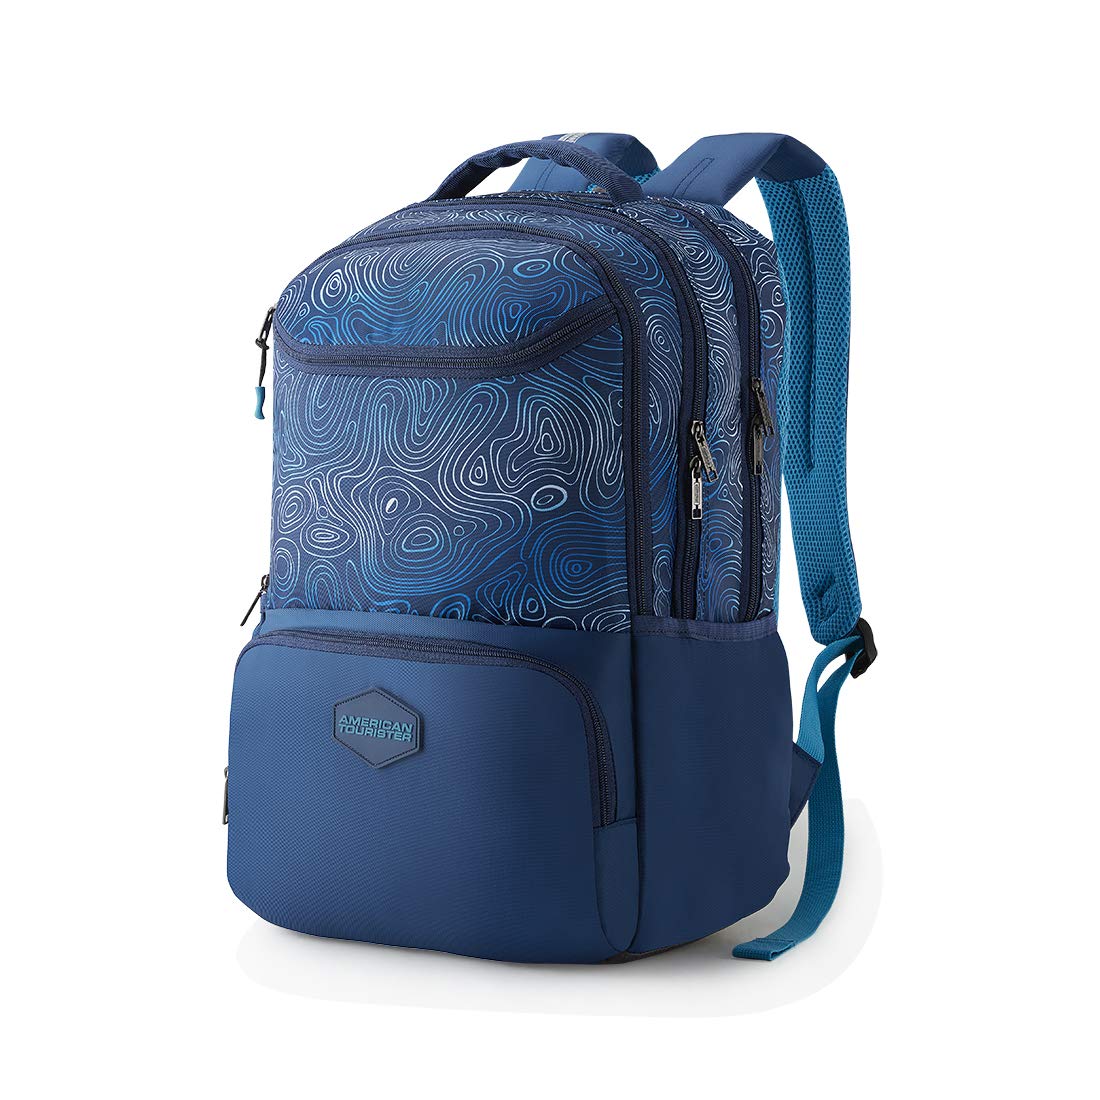 American Tourister Turf 32 Ltrs Blue Casual Backpack (FF0 (0) 01 001)